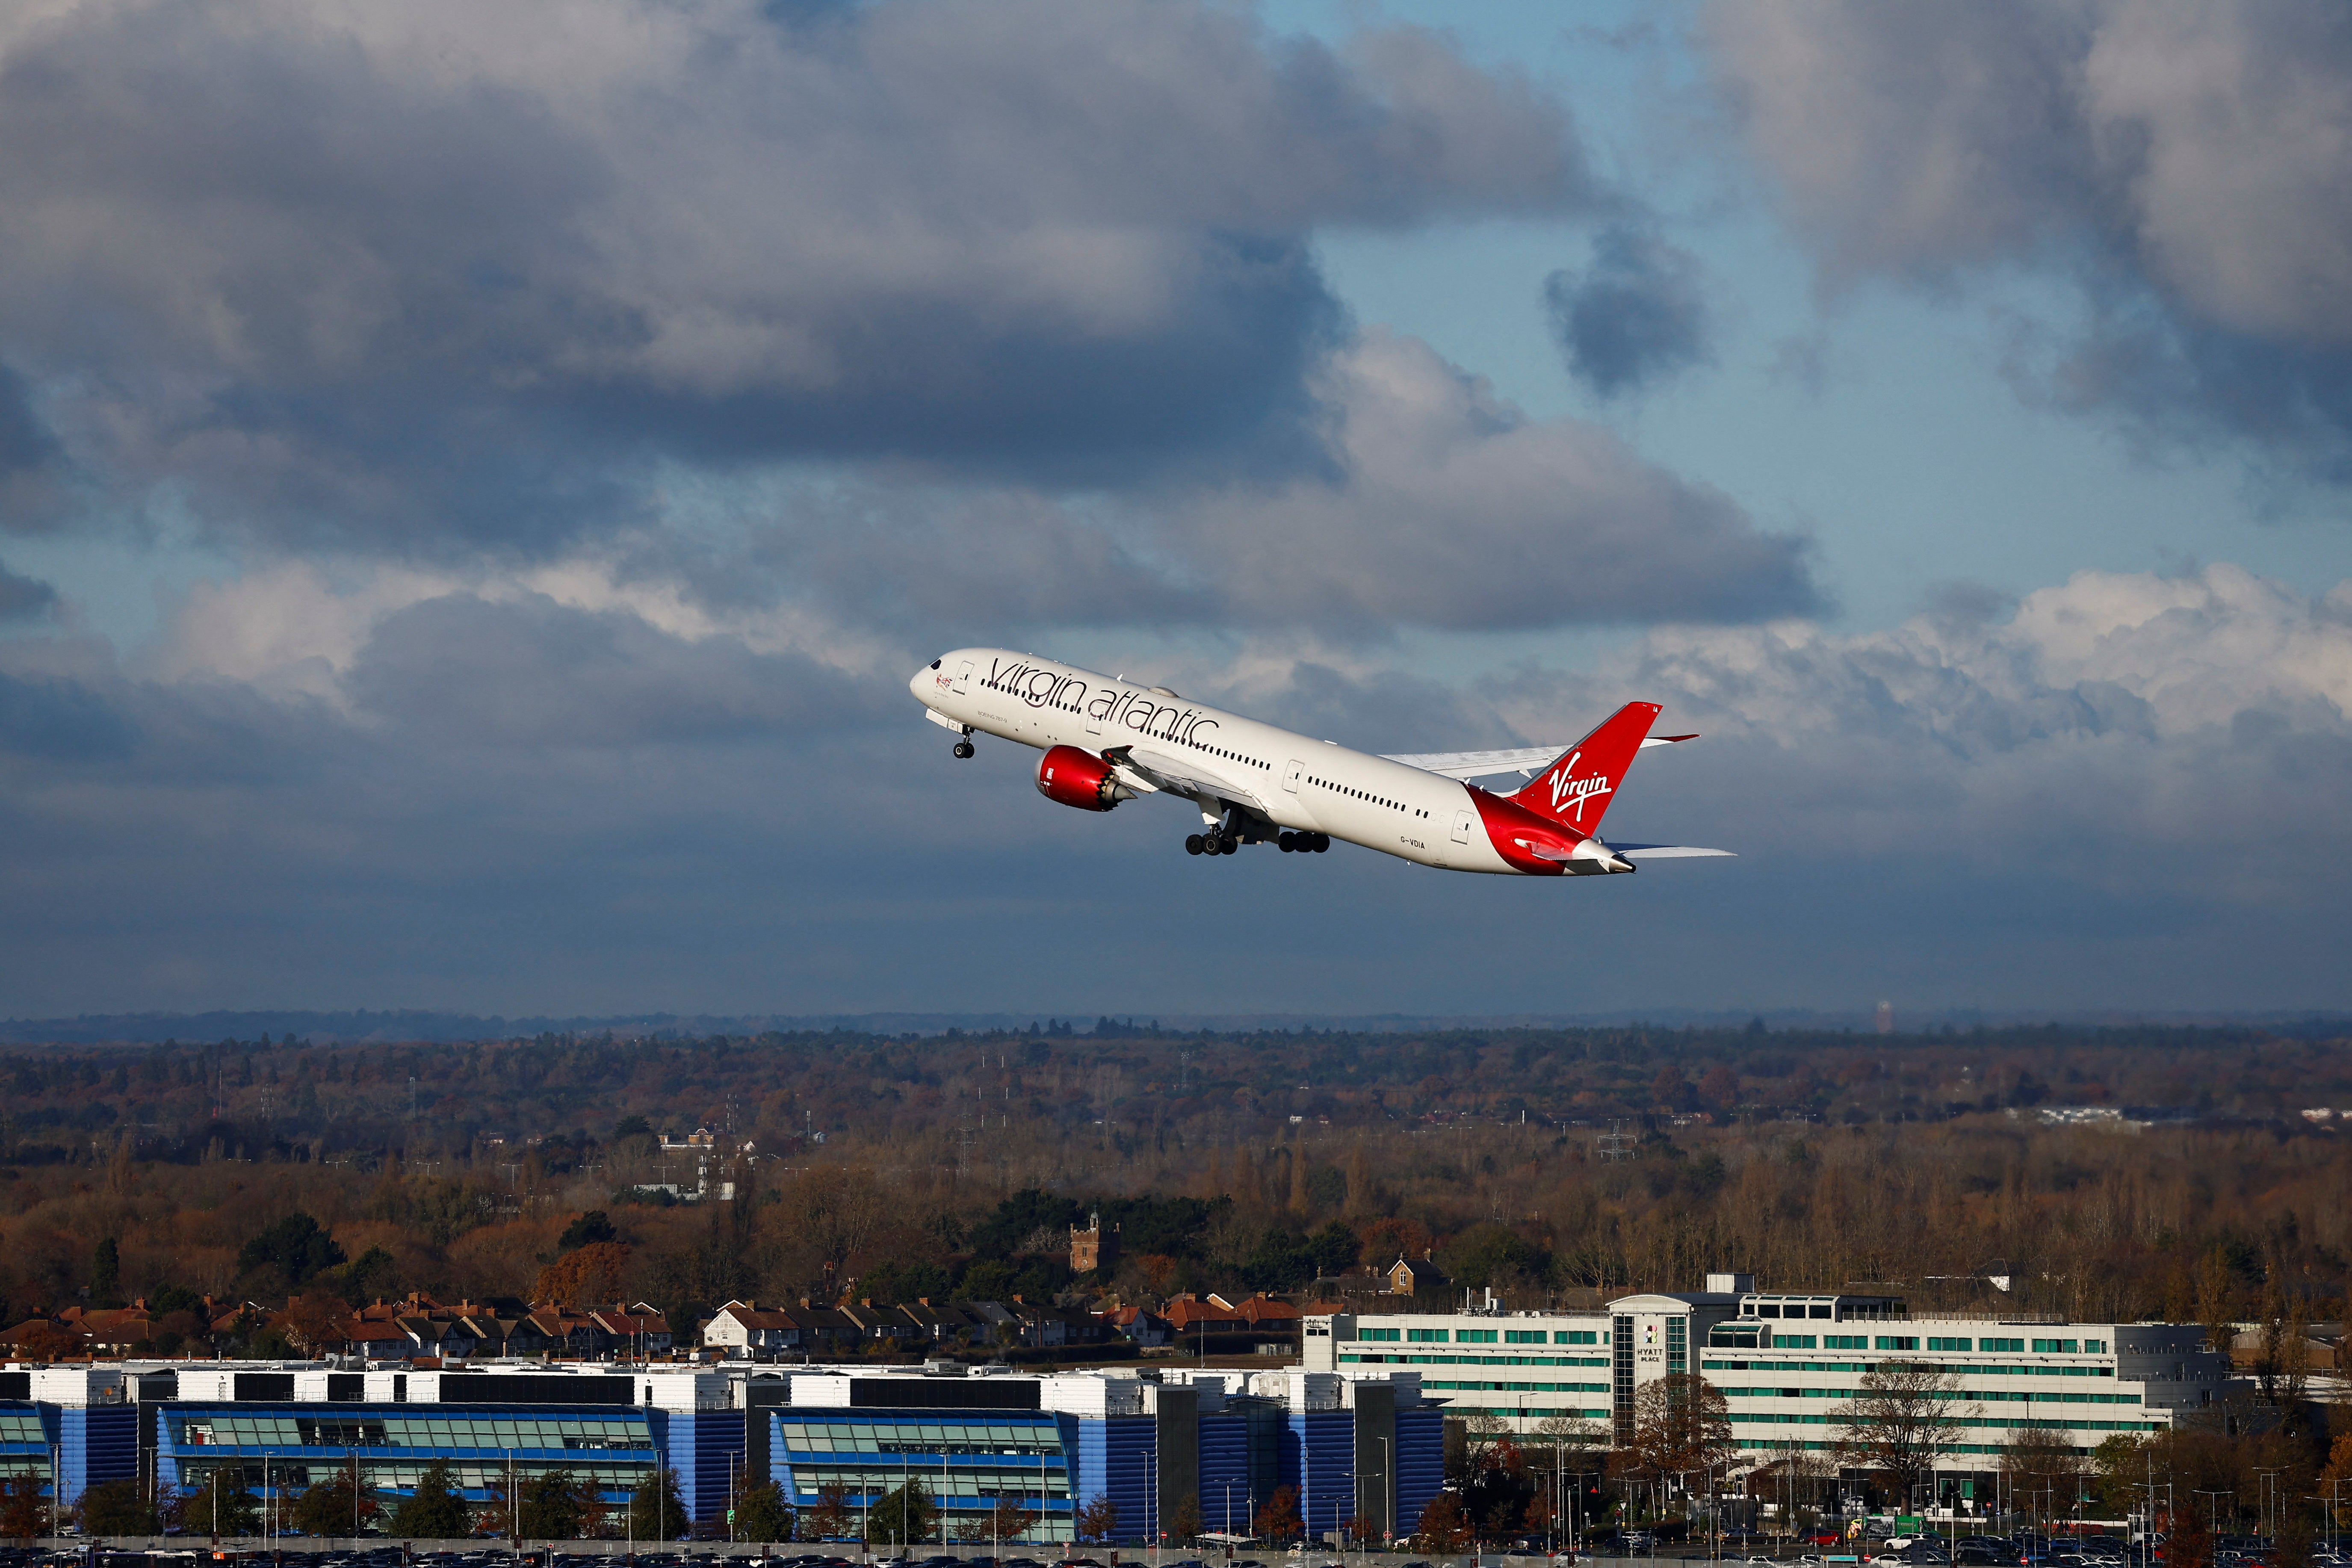 Virgin Atlantic operated the first transatlantic flight powered entirely by sustainable aviation fuel on Tuesday